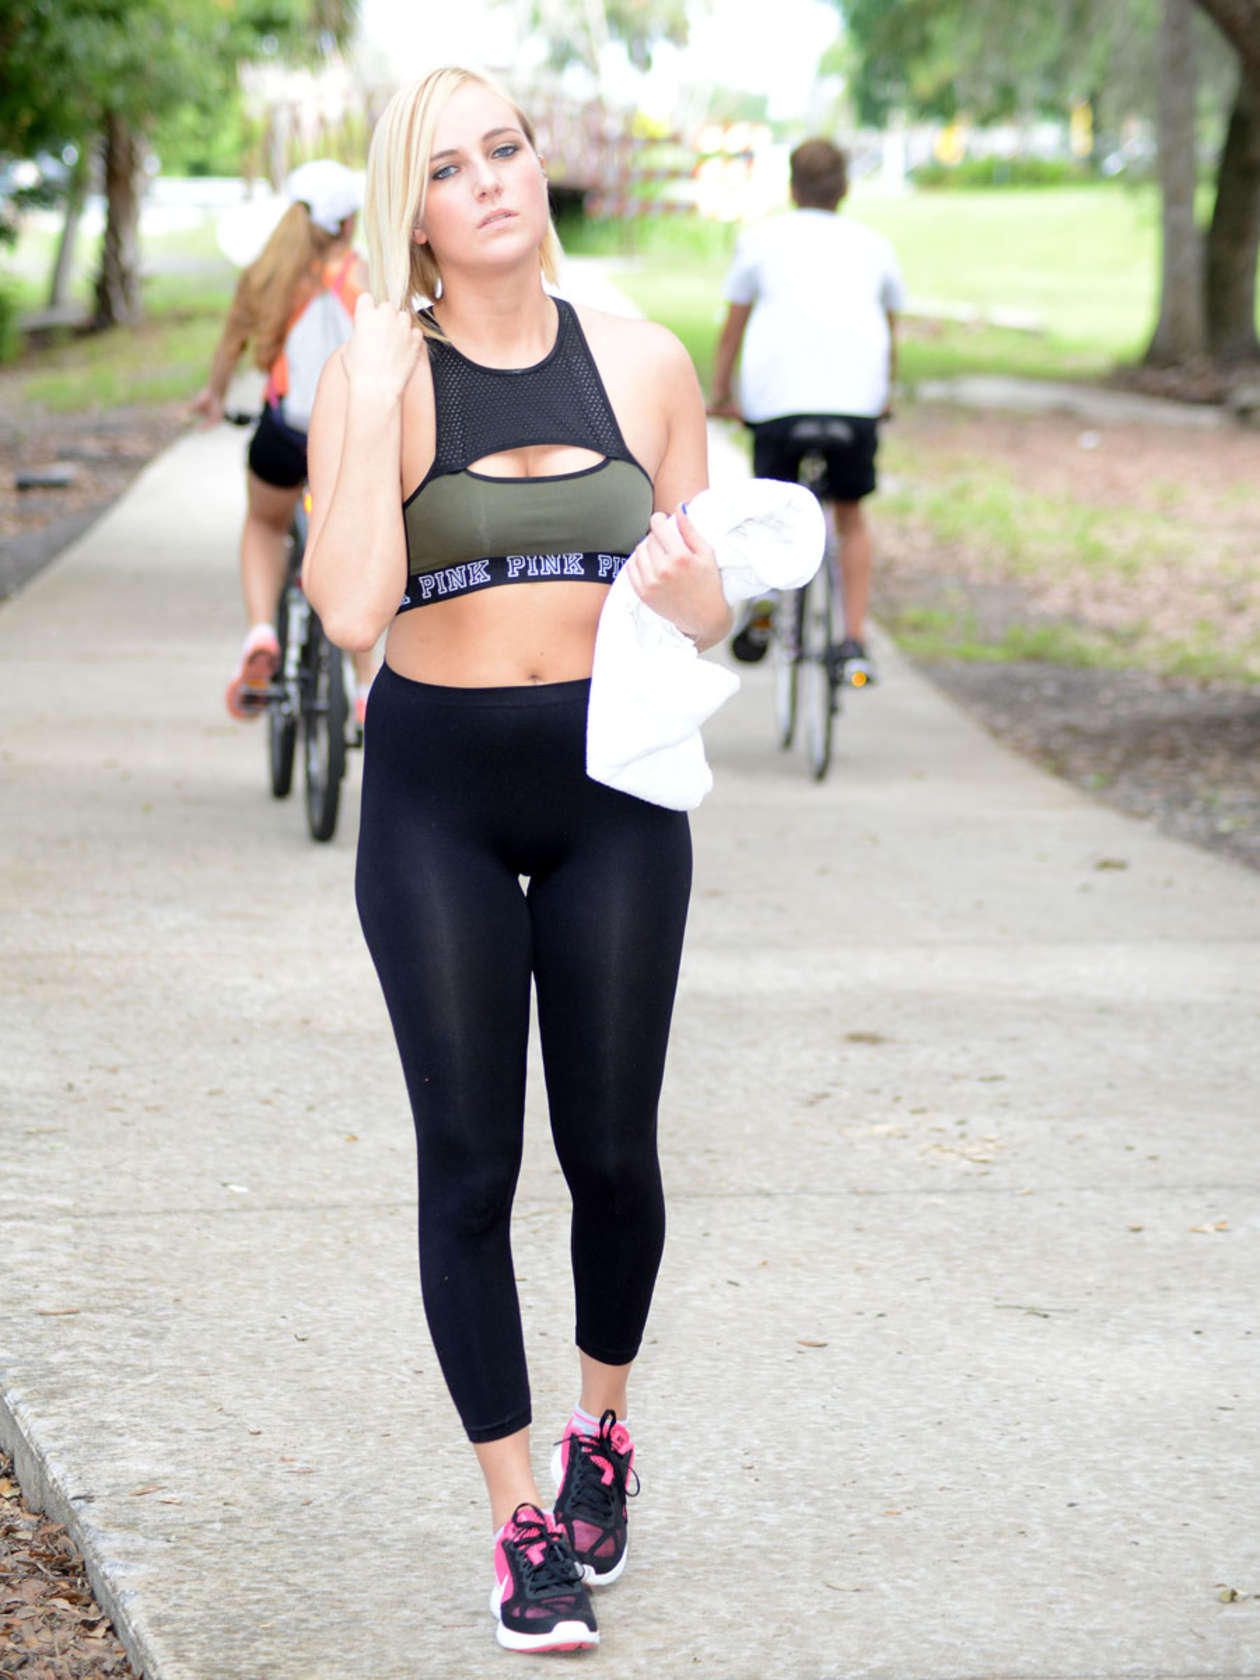 Kate england in tights and sports bra workout in orlando